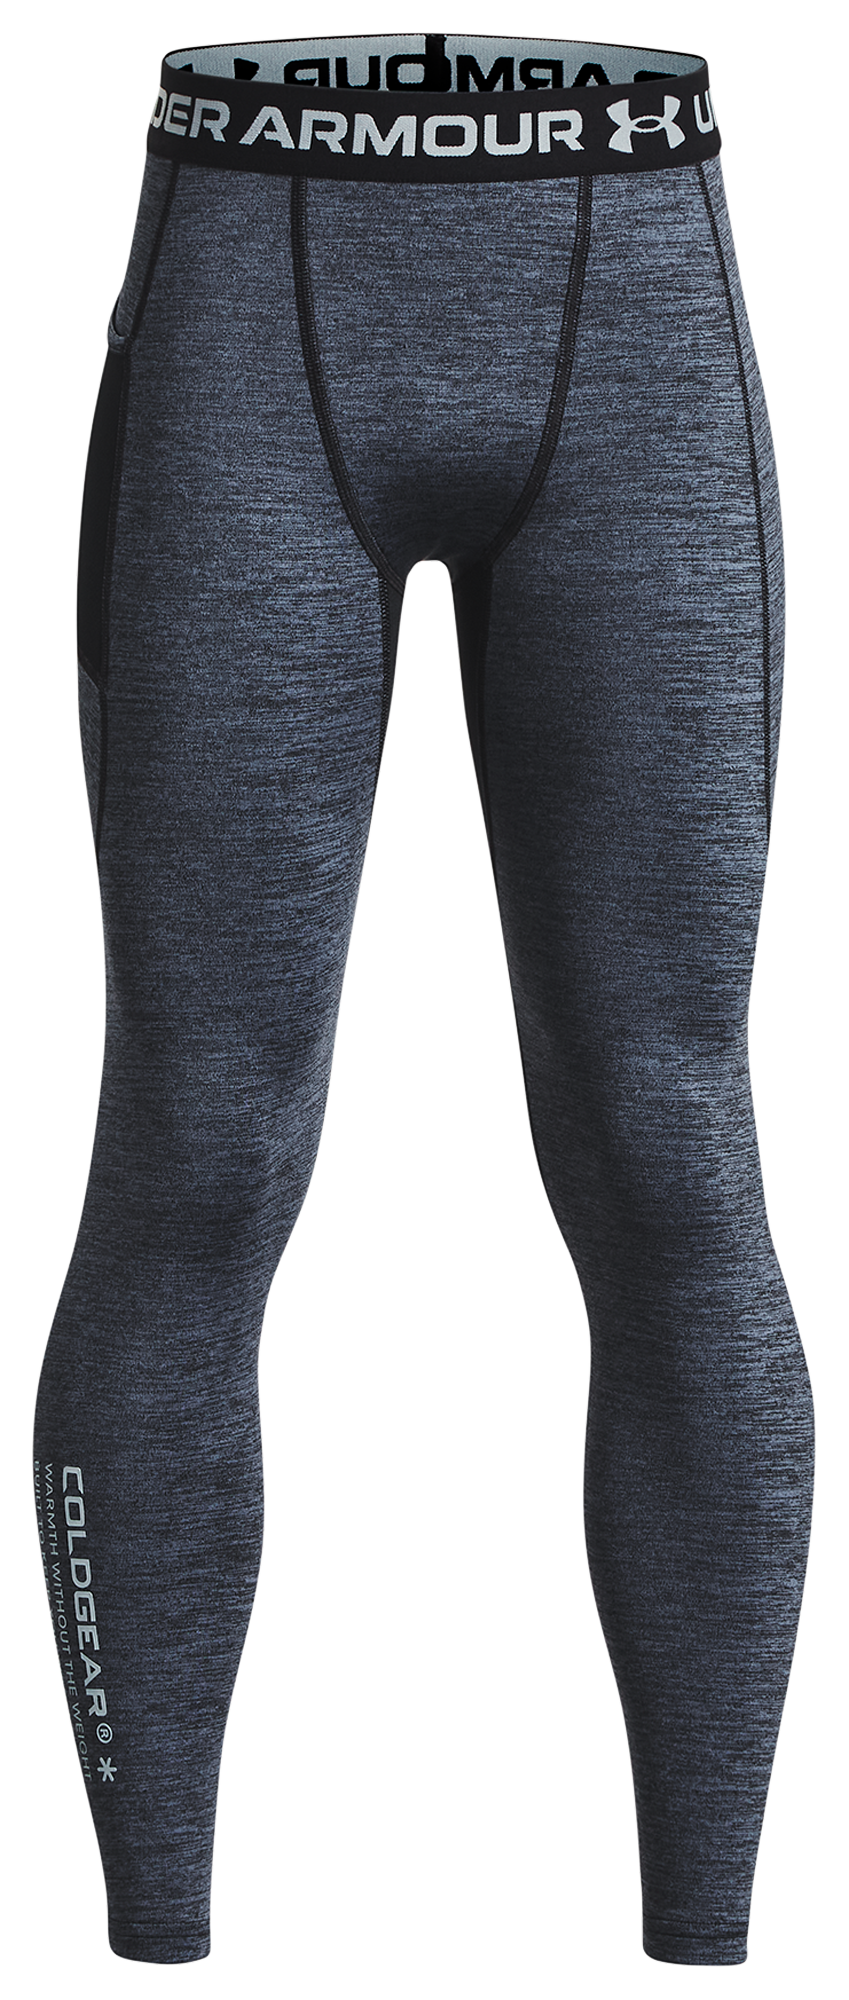 Under Armour HeatGear® Armour Printed - Training Tights Compression Pants